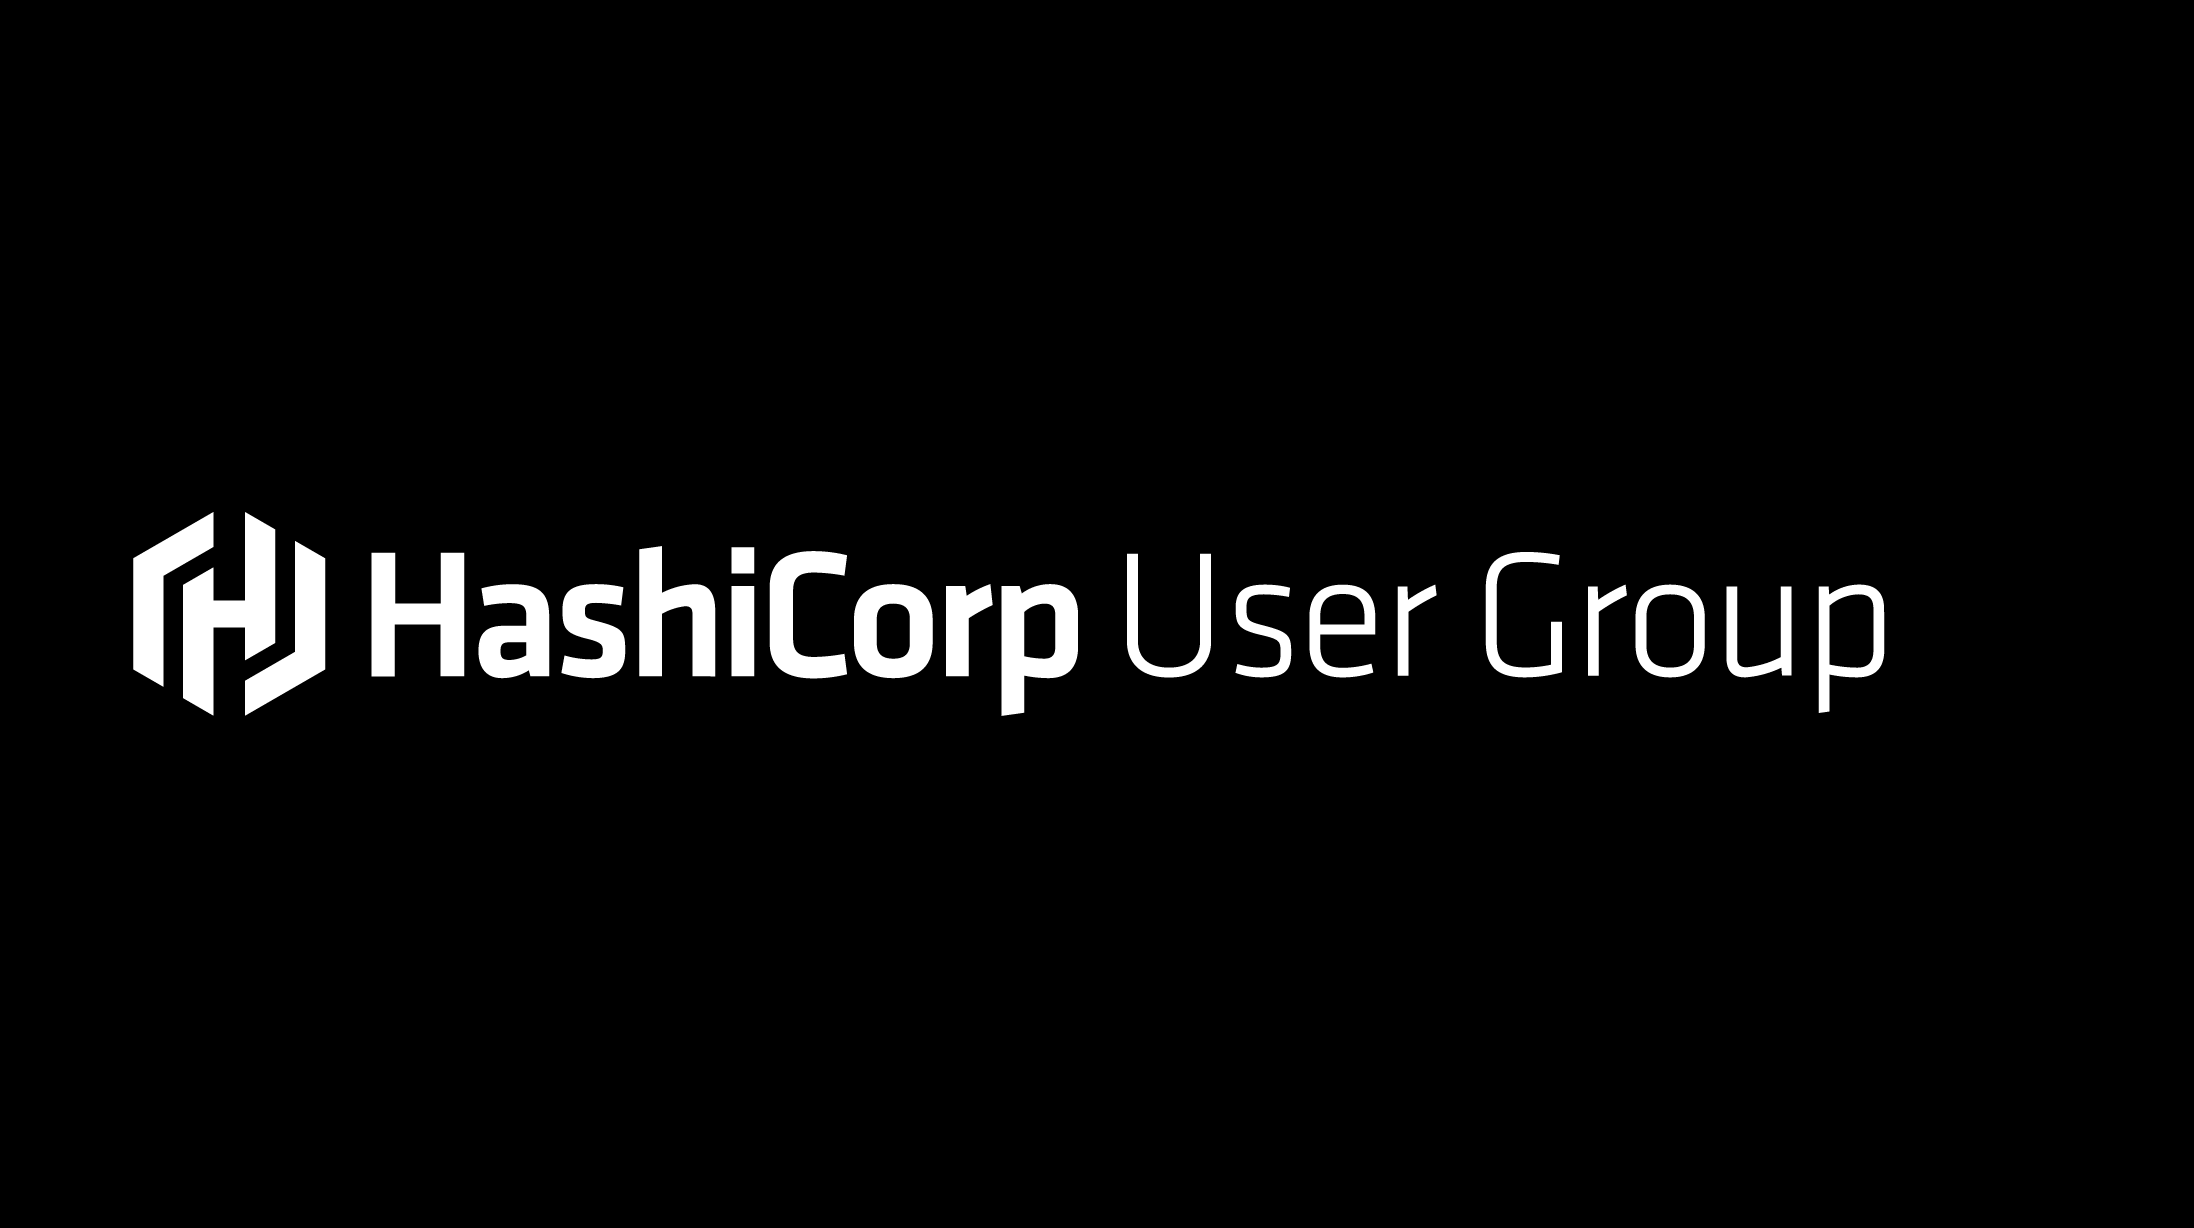 Building Richer Interactions in the HashiCorp Community